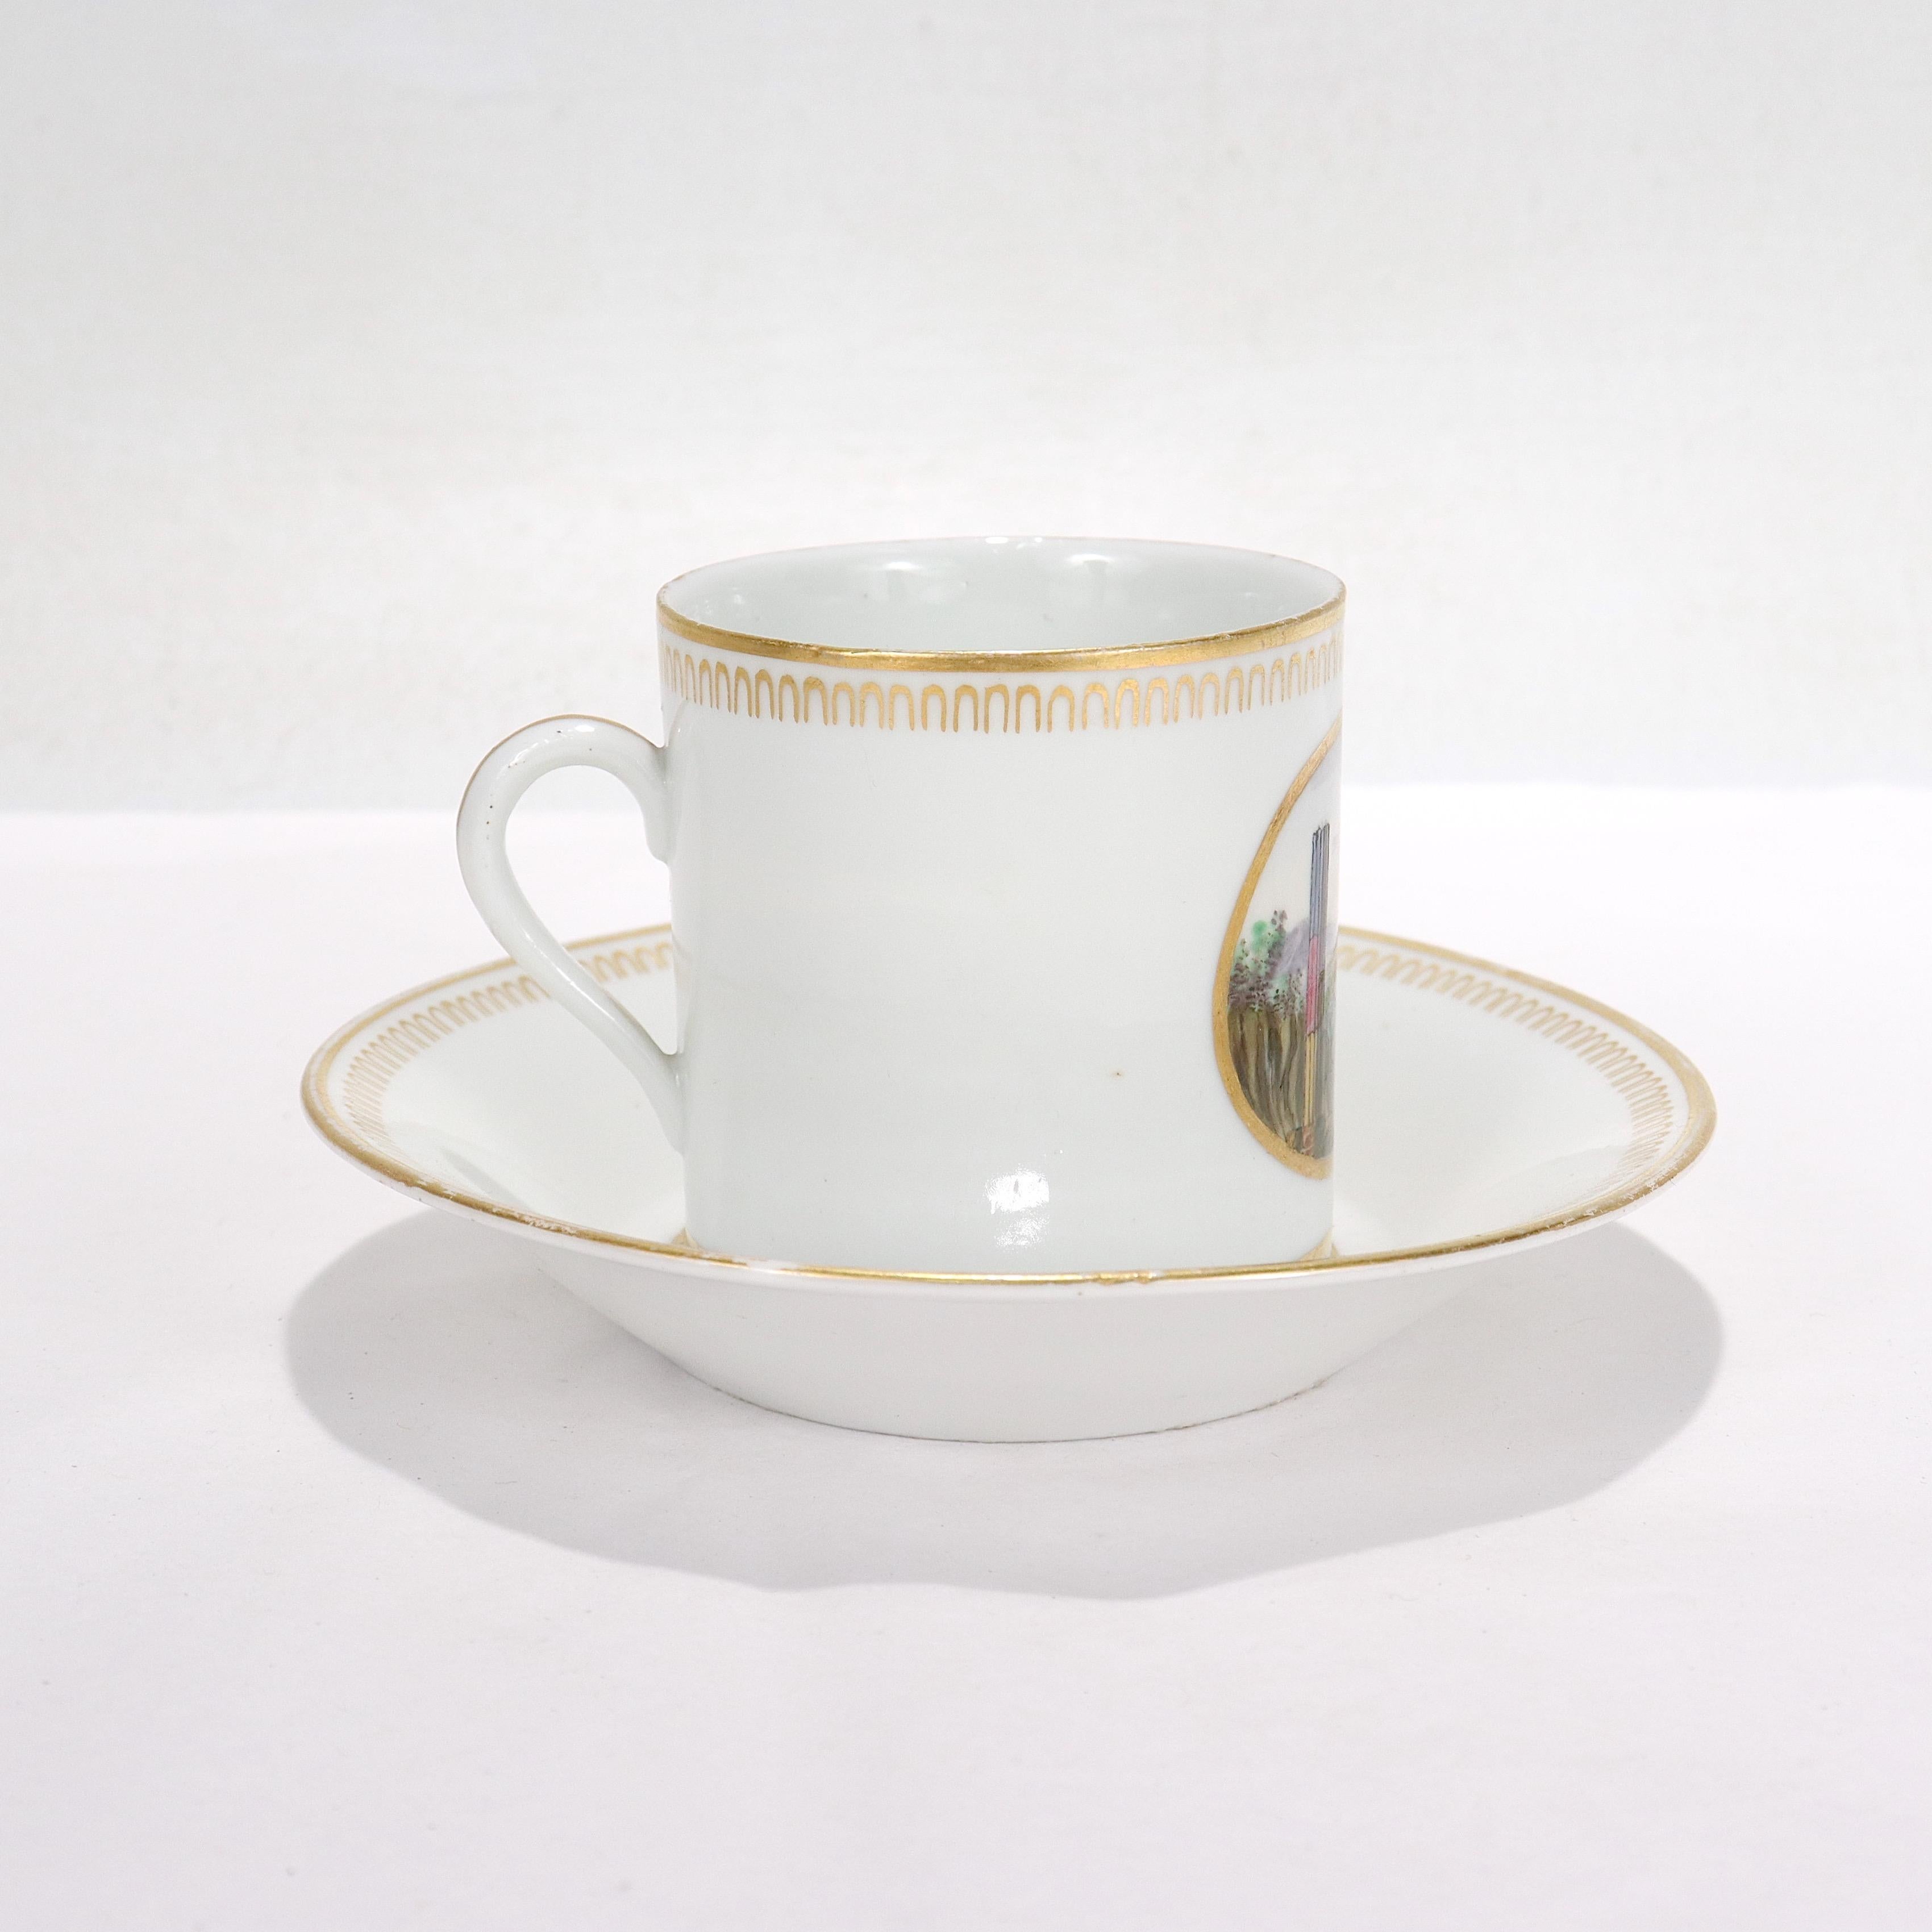 19th Century Antique Italian Doccia Topographical Porcelain Neoclassical Cup and Saucer For Sale